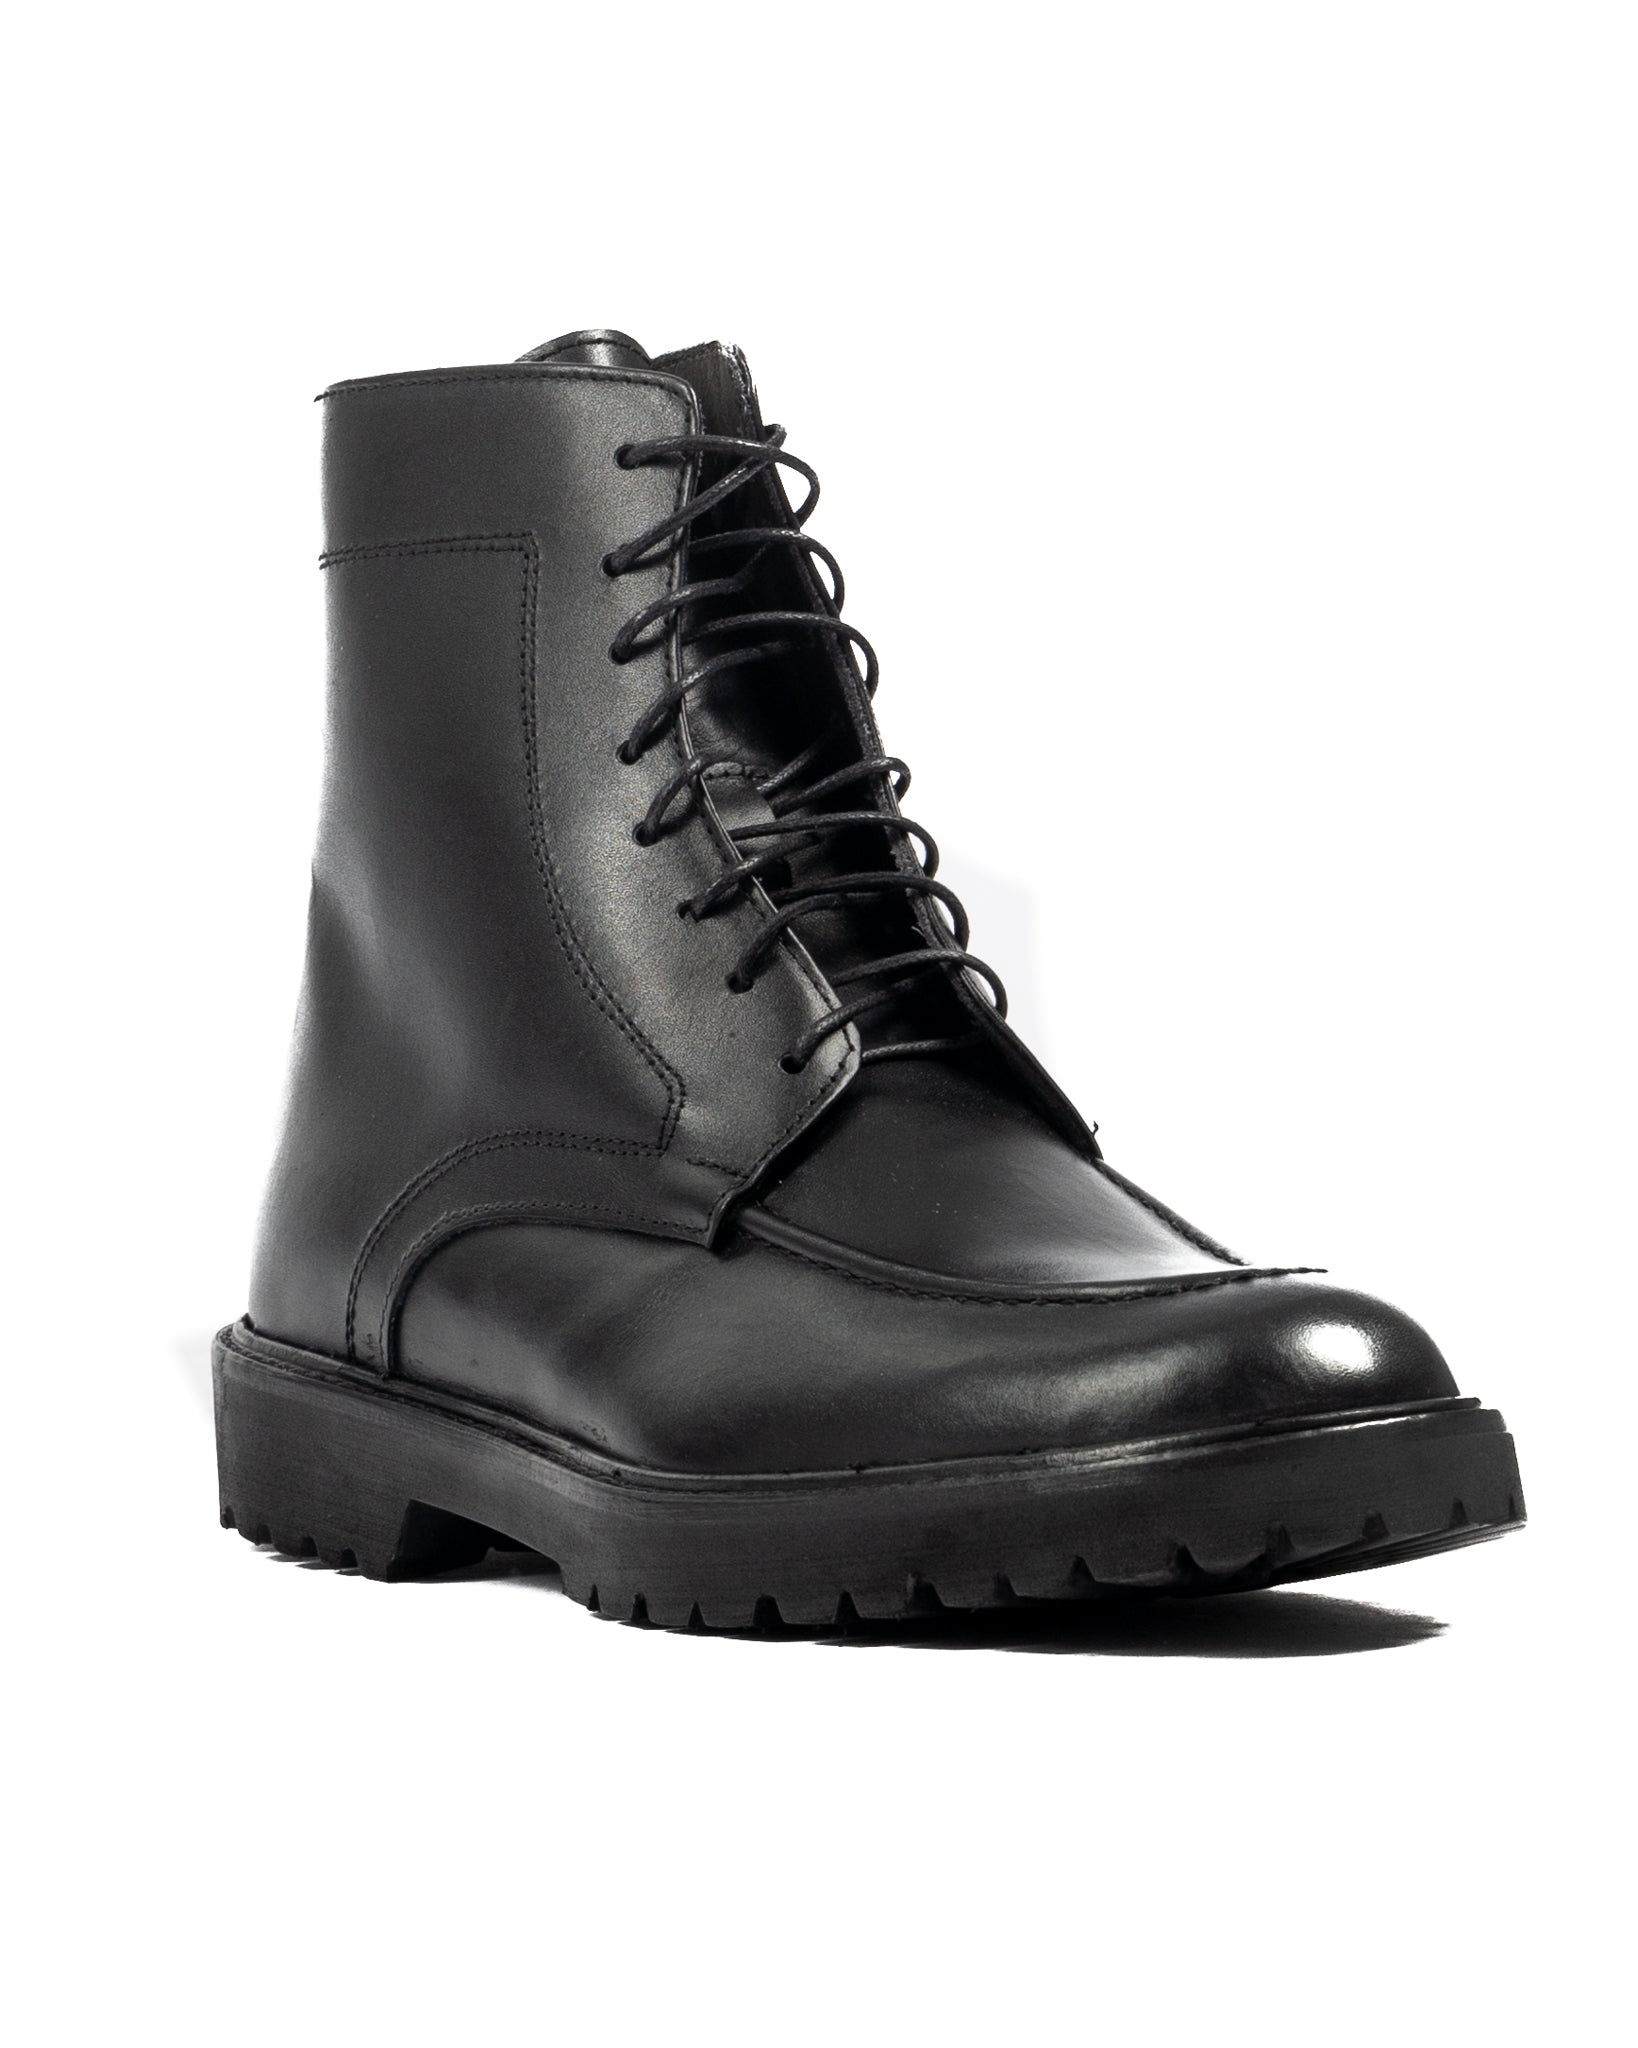 Astron - black leather boot